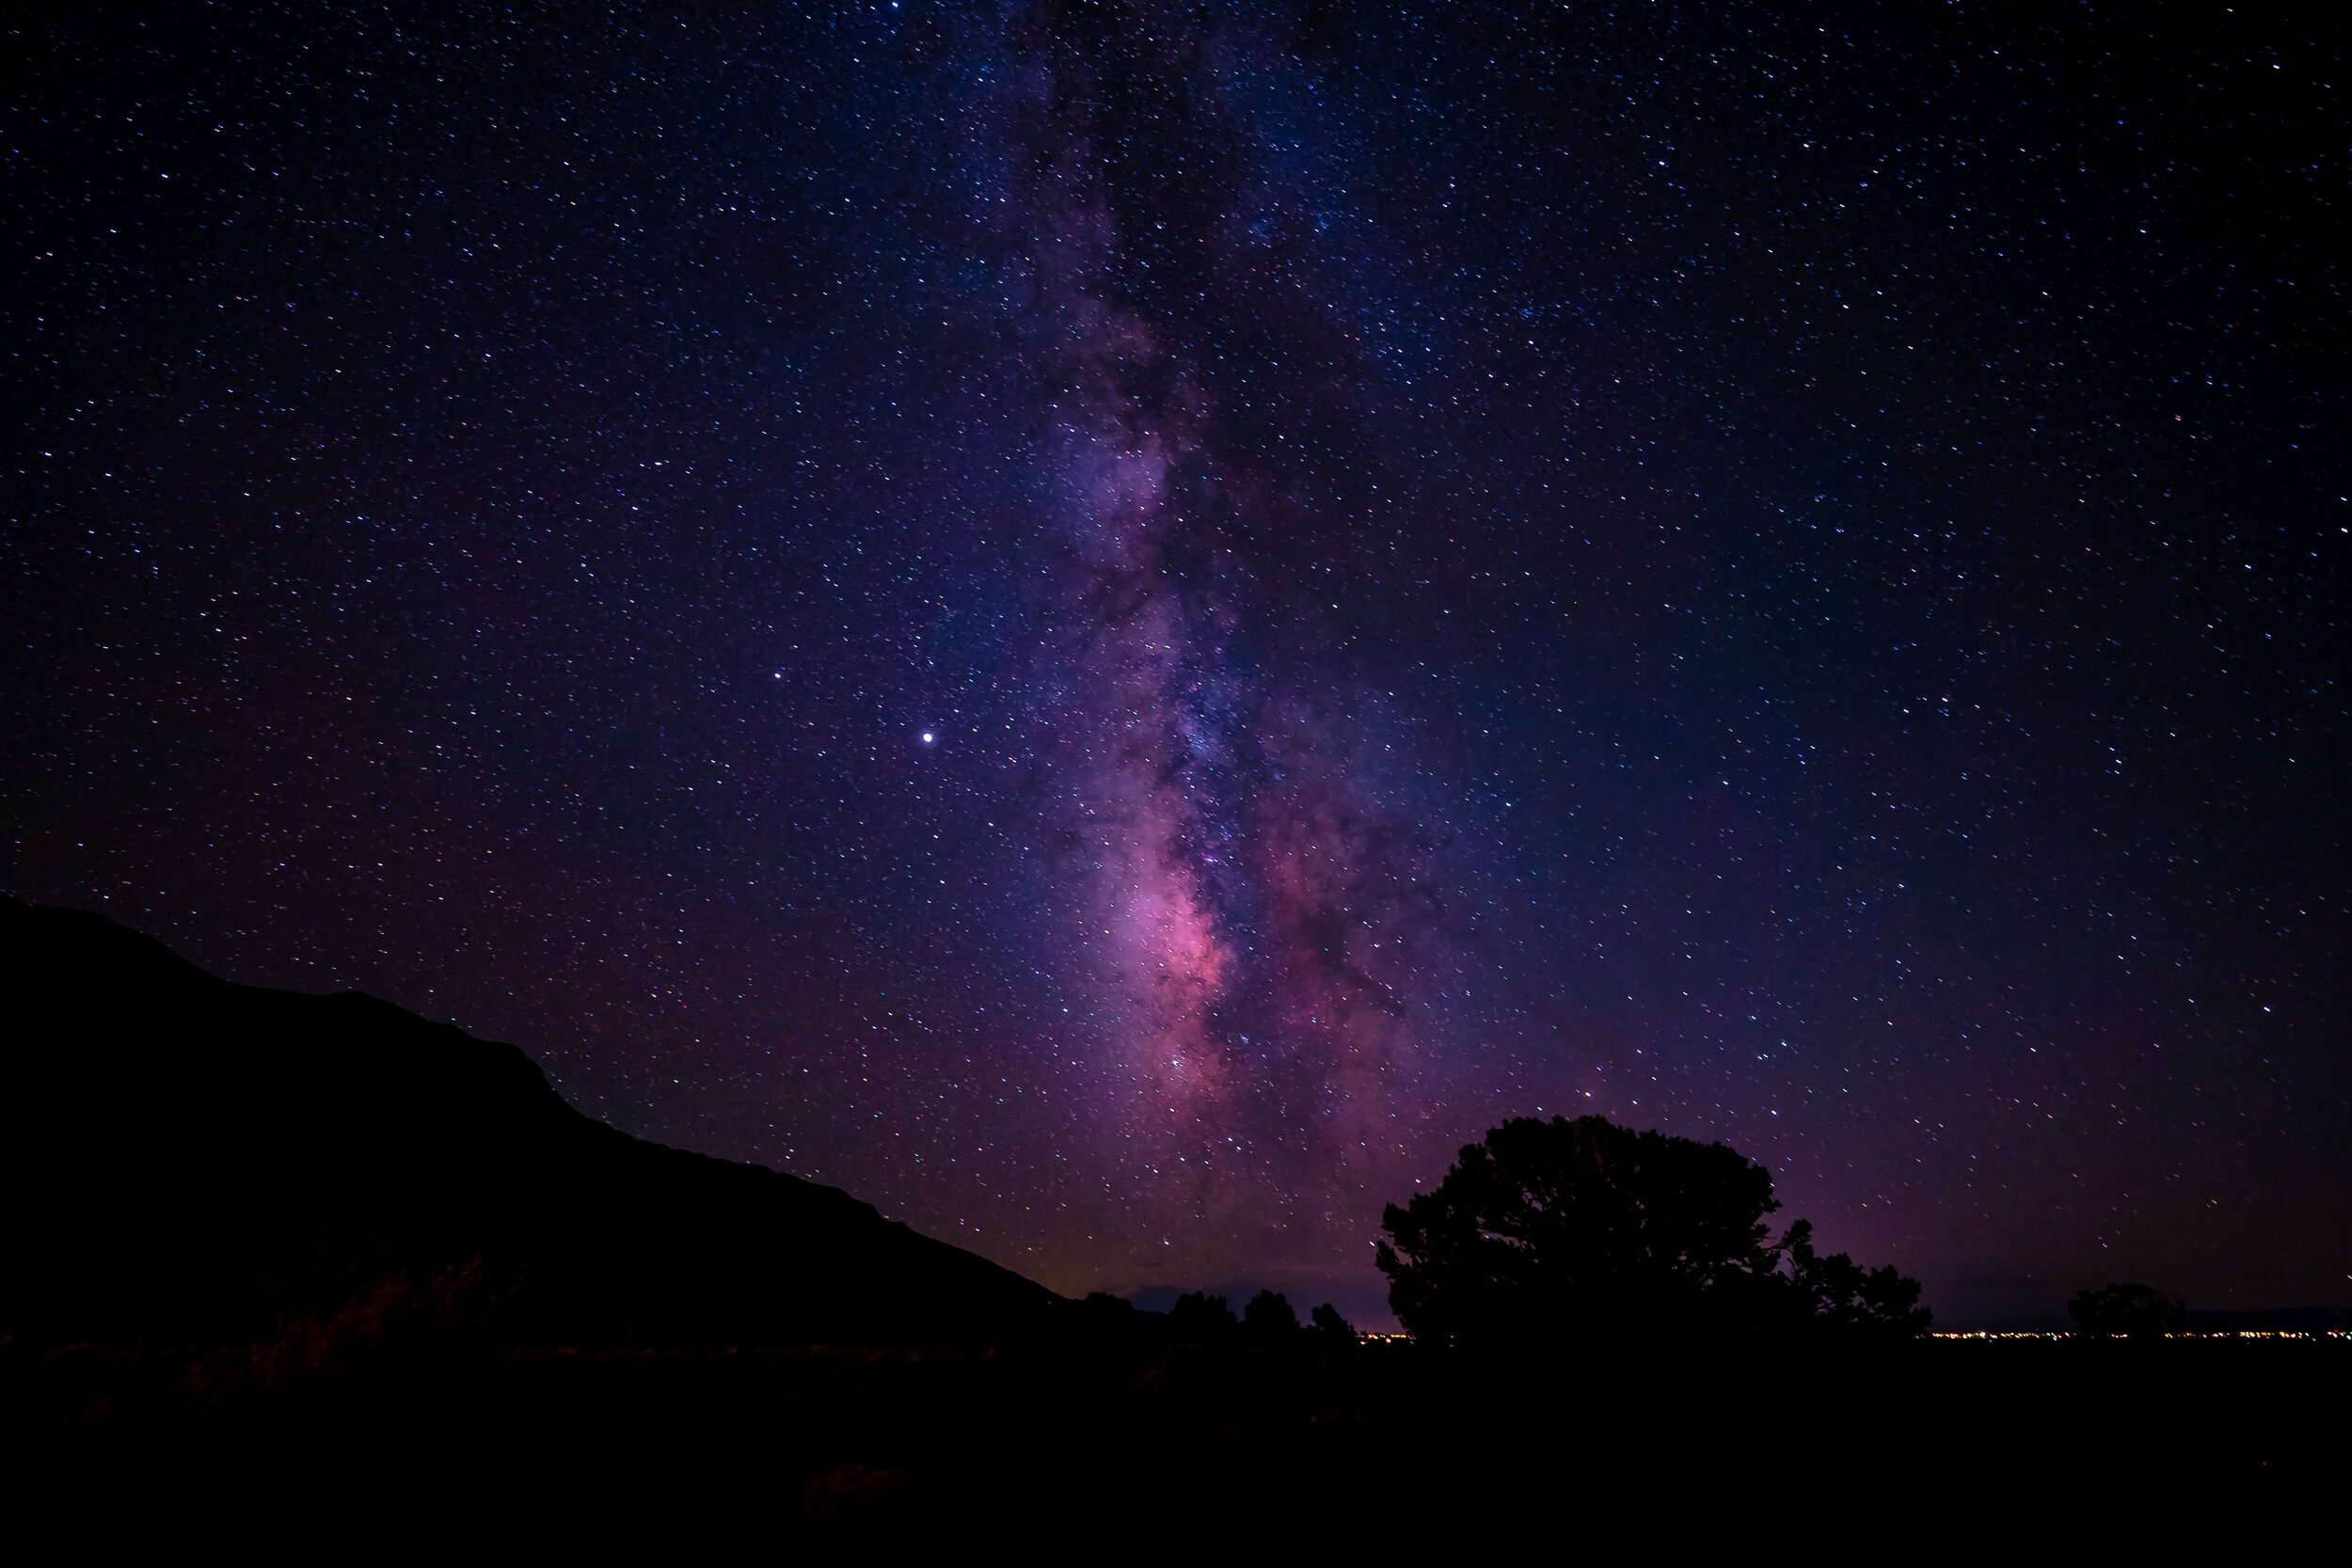  Great Sand Dunes NP is a certified International Dark Sky Park. This means that the park’s rare combination of dry air, little light pollution, and high elevation makes it perfect for viewing galaxies. Craig took advantage of the optimal photographi